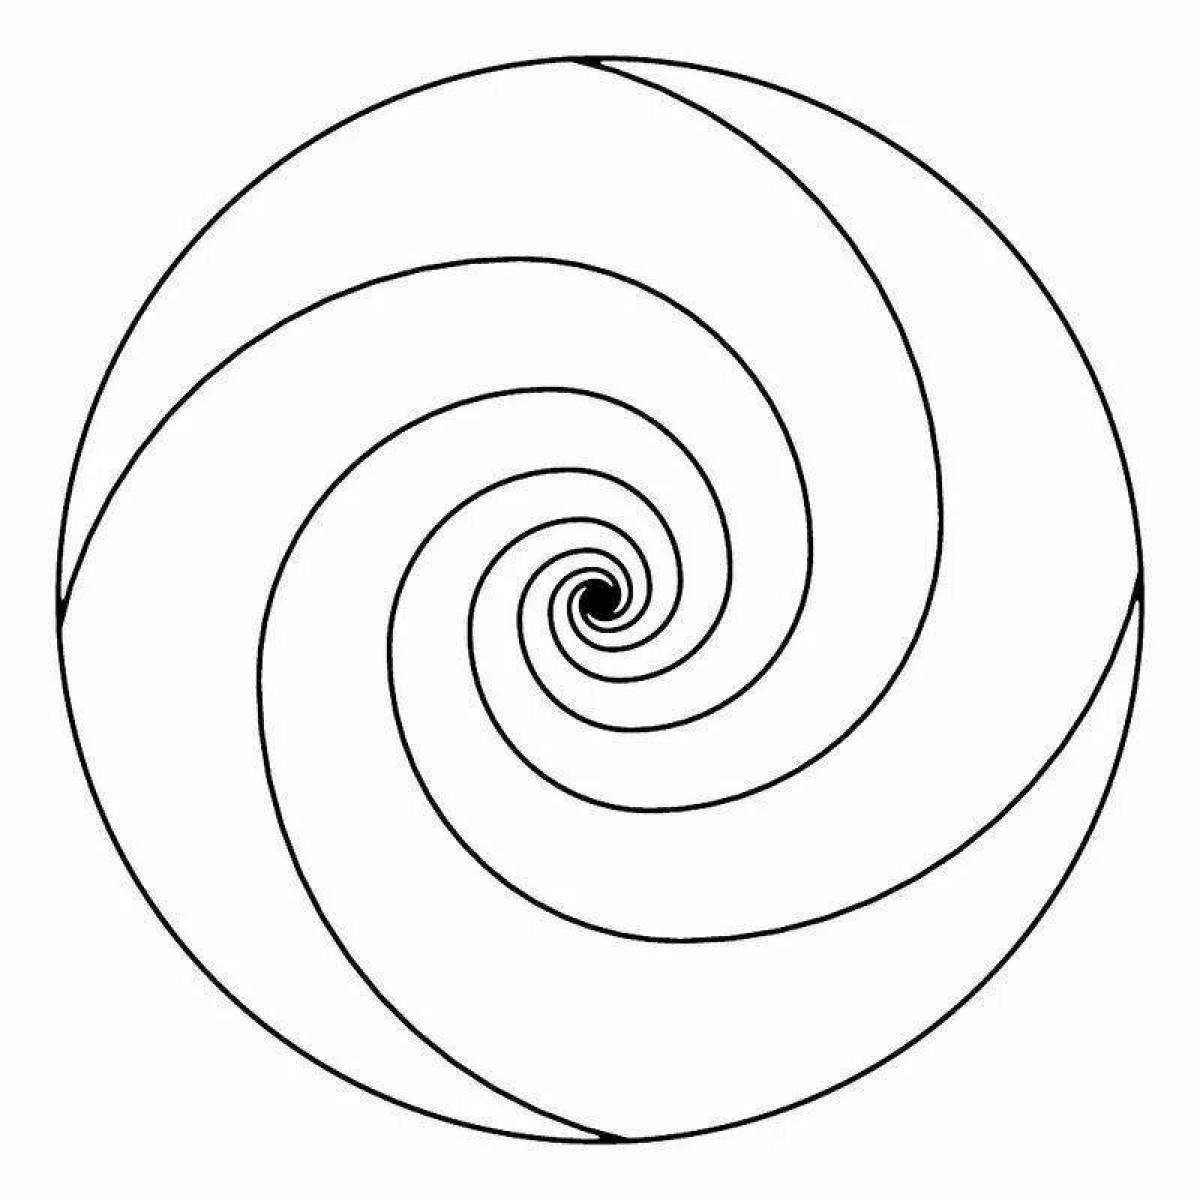 Creative betty spiral create coloring page